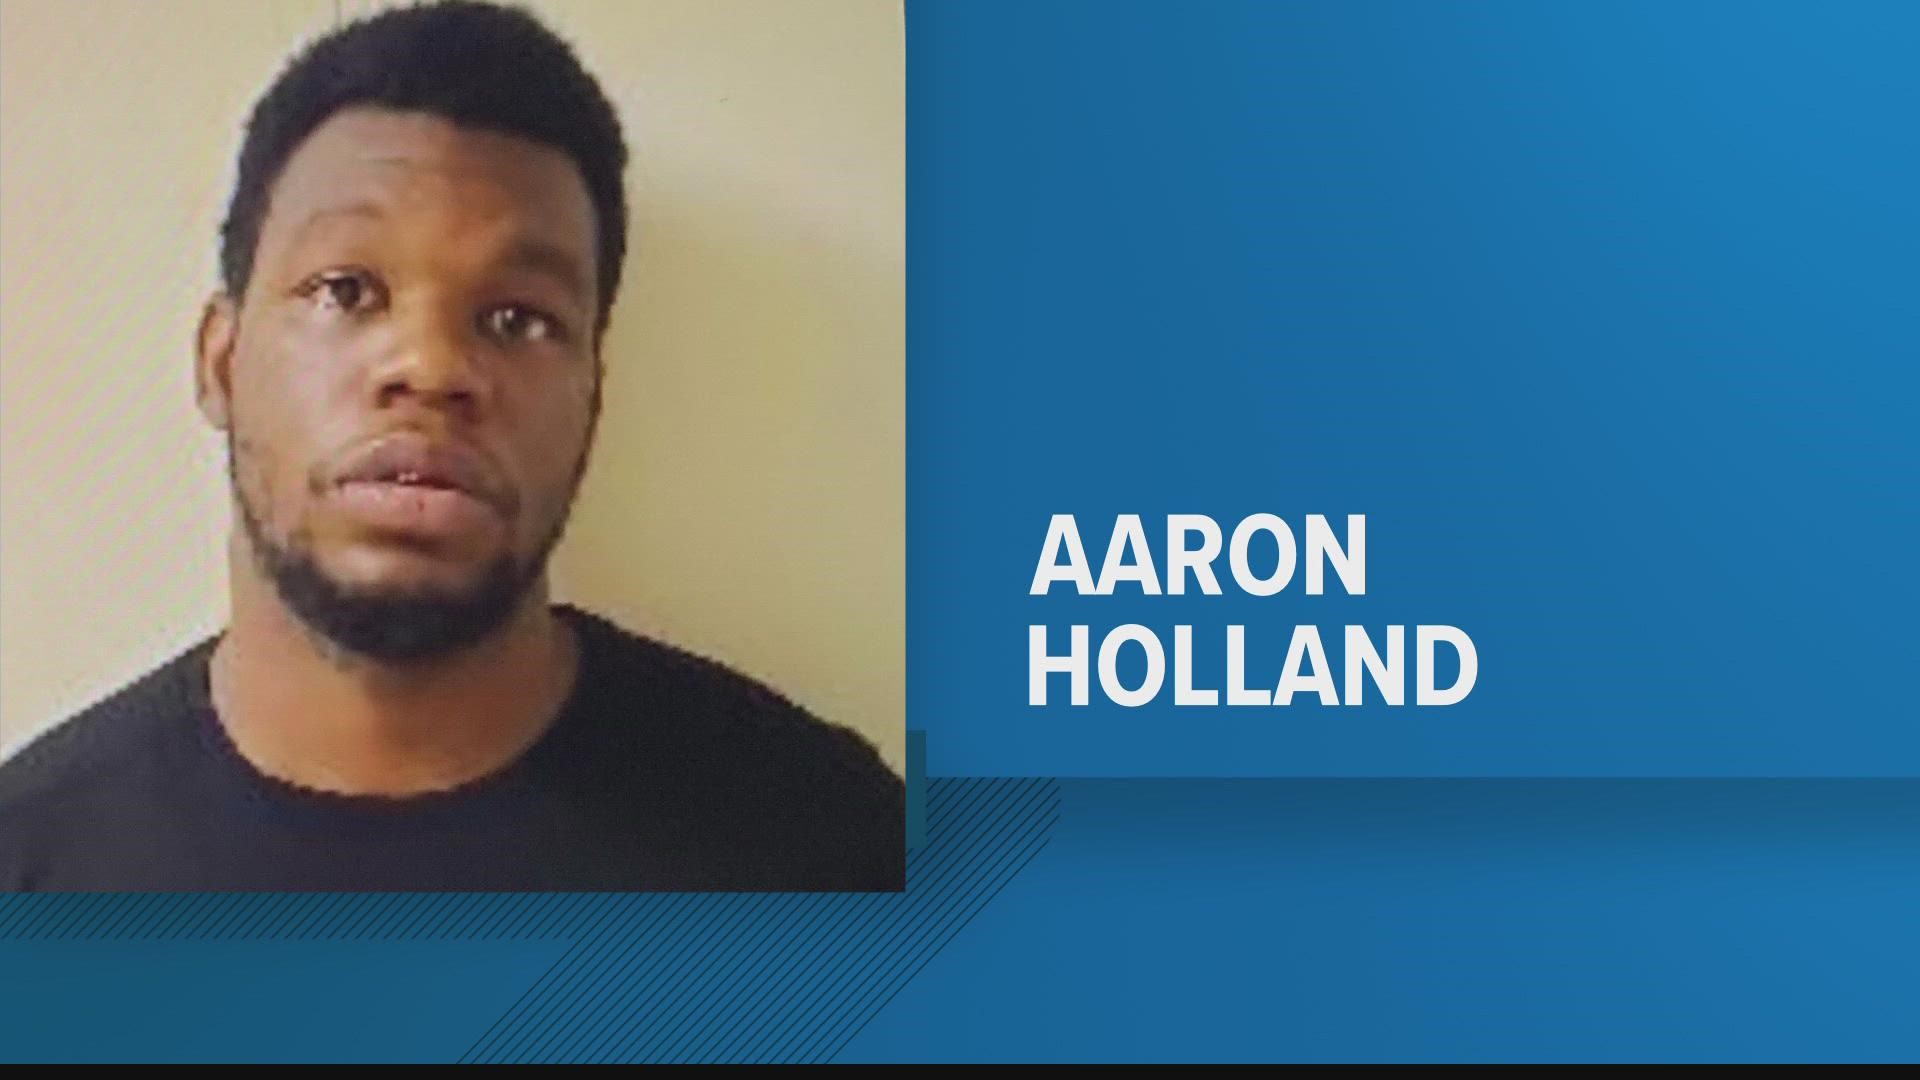 After speaking to witnesses, police discovered 23-year-old Aaron Holland was at a home when he opened fire from inside the bathroom.